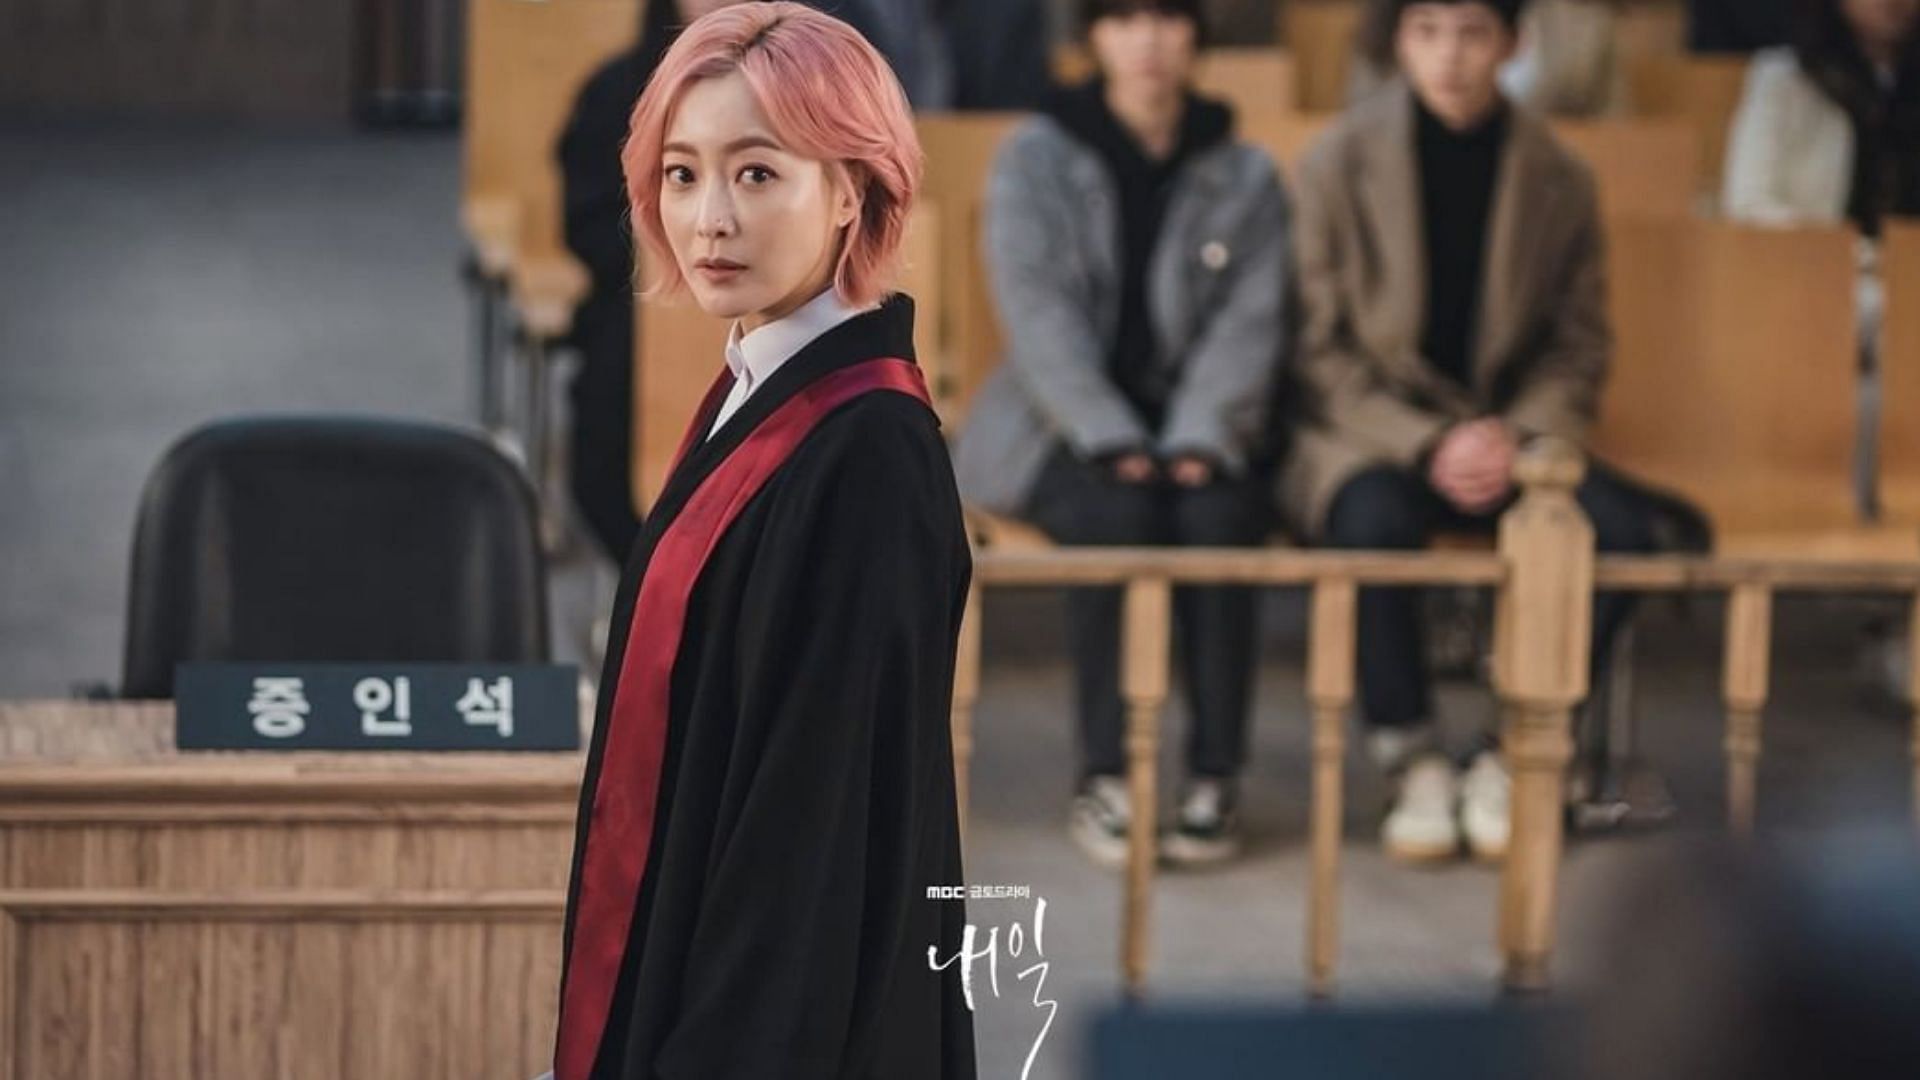 A still of Kim Hee-seon (Image from Mbcdrama/Instagram)